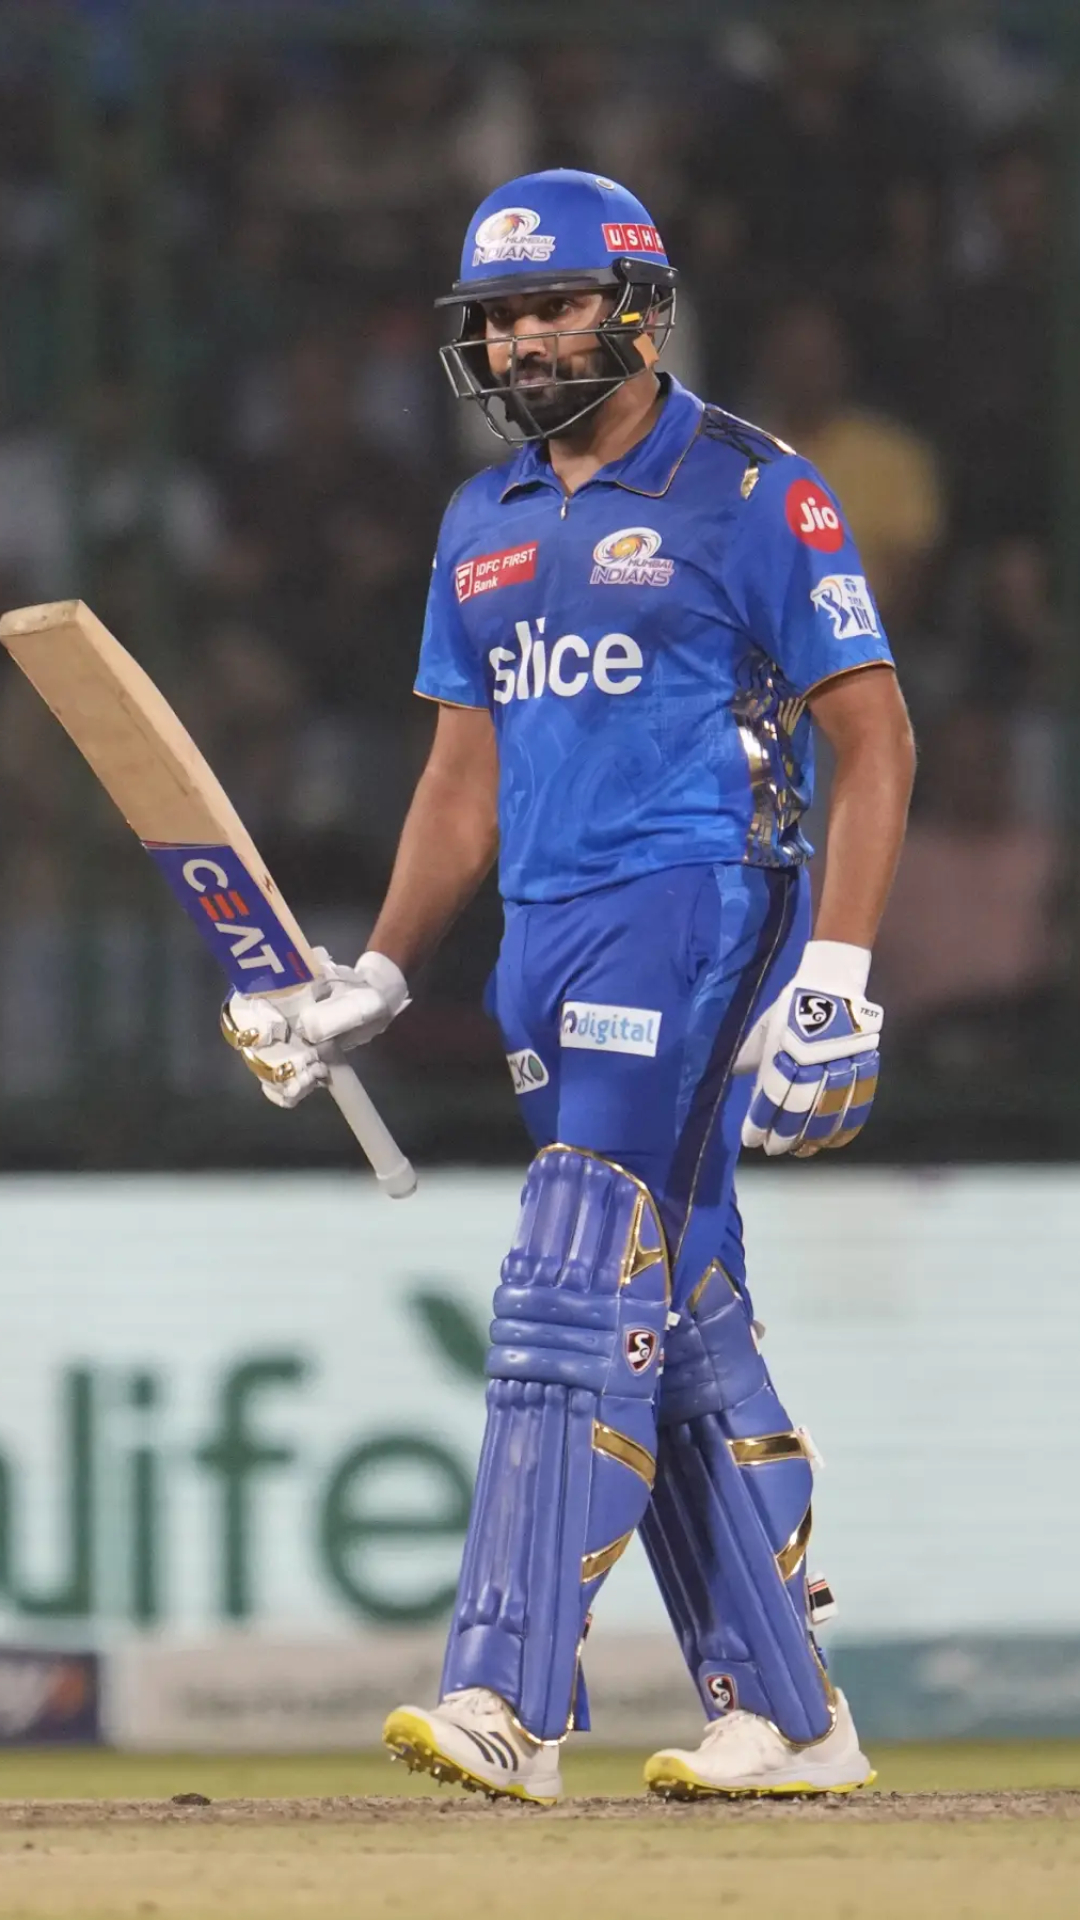 Rohit Sharma becomes 1st Indian to hit 250 sixes in IPL, here's list of players with most sixes